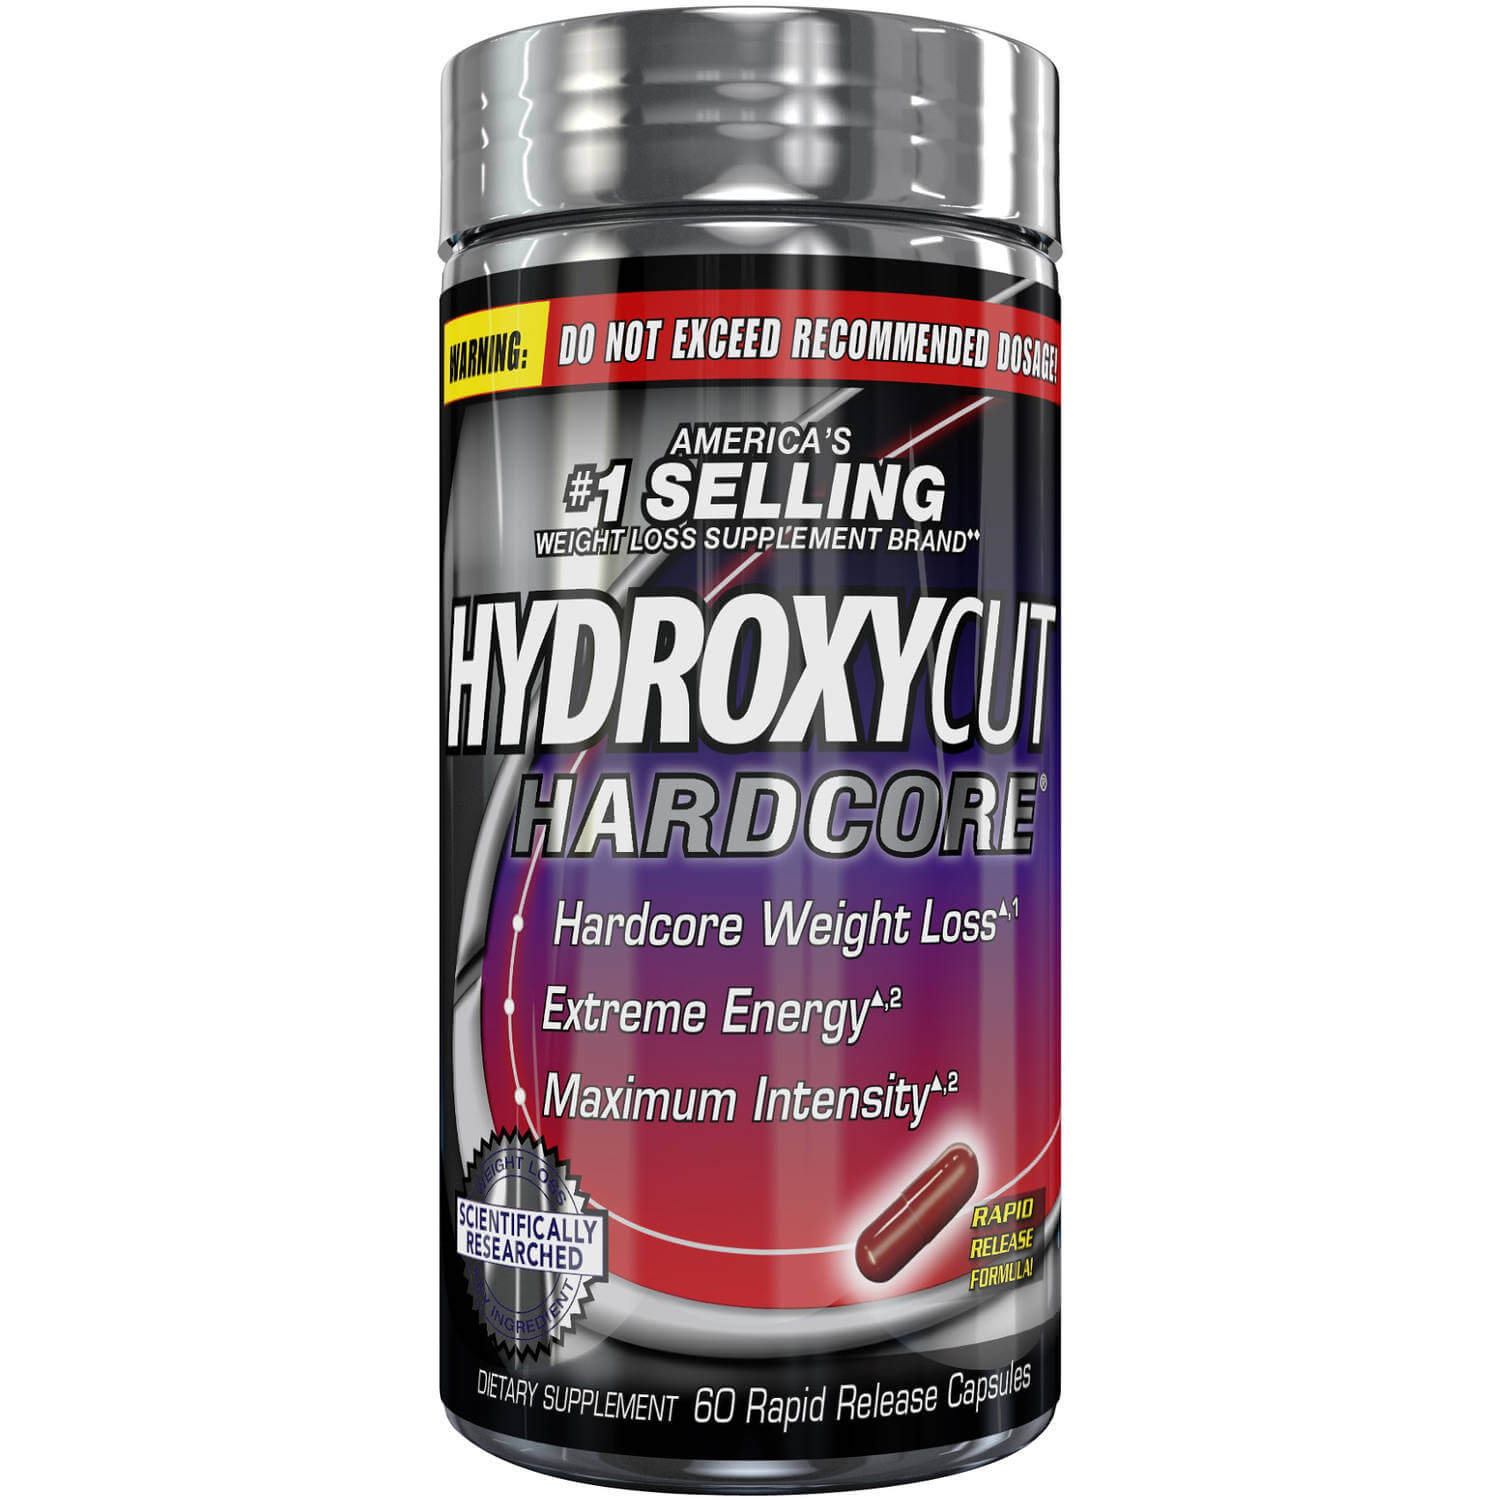 Cool-Whip reccomend hardcore hydroxycut Hardcore price Low